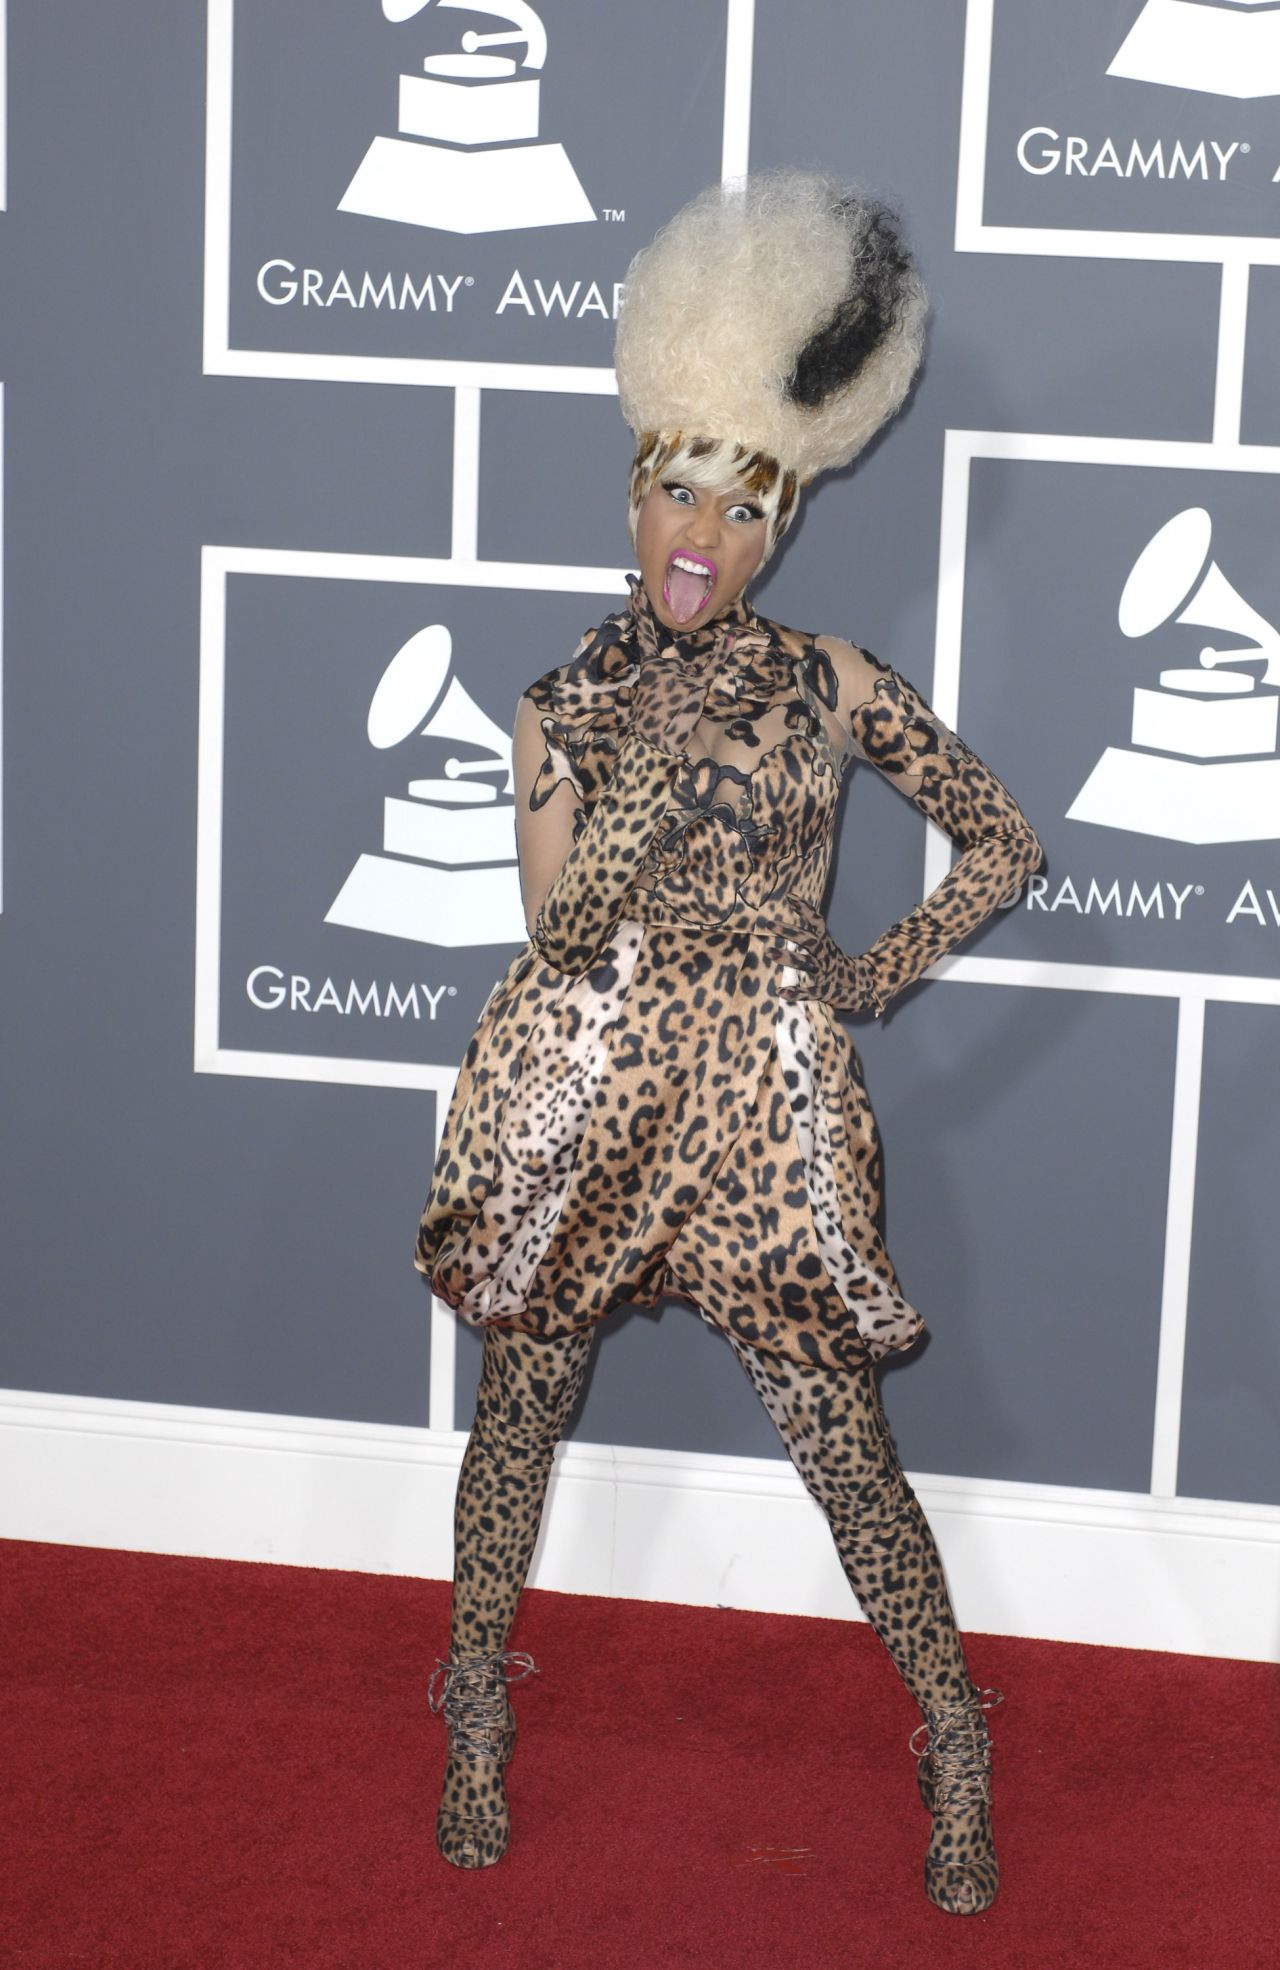 Nicki Minaj, wearing Givenchy Couture, arrives for The 53rd Annual Grammy Awards in Los Angeles in 2011.